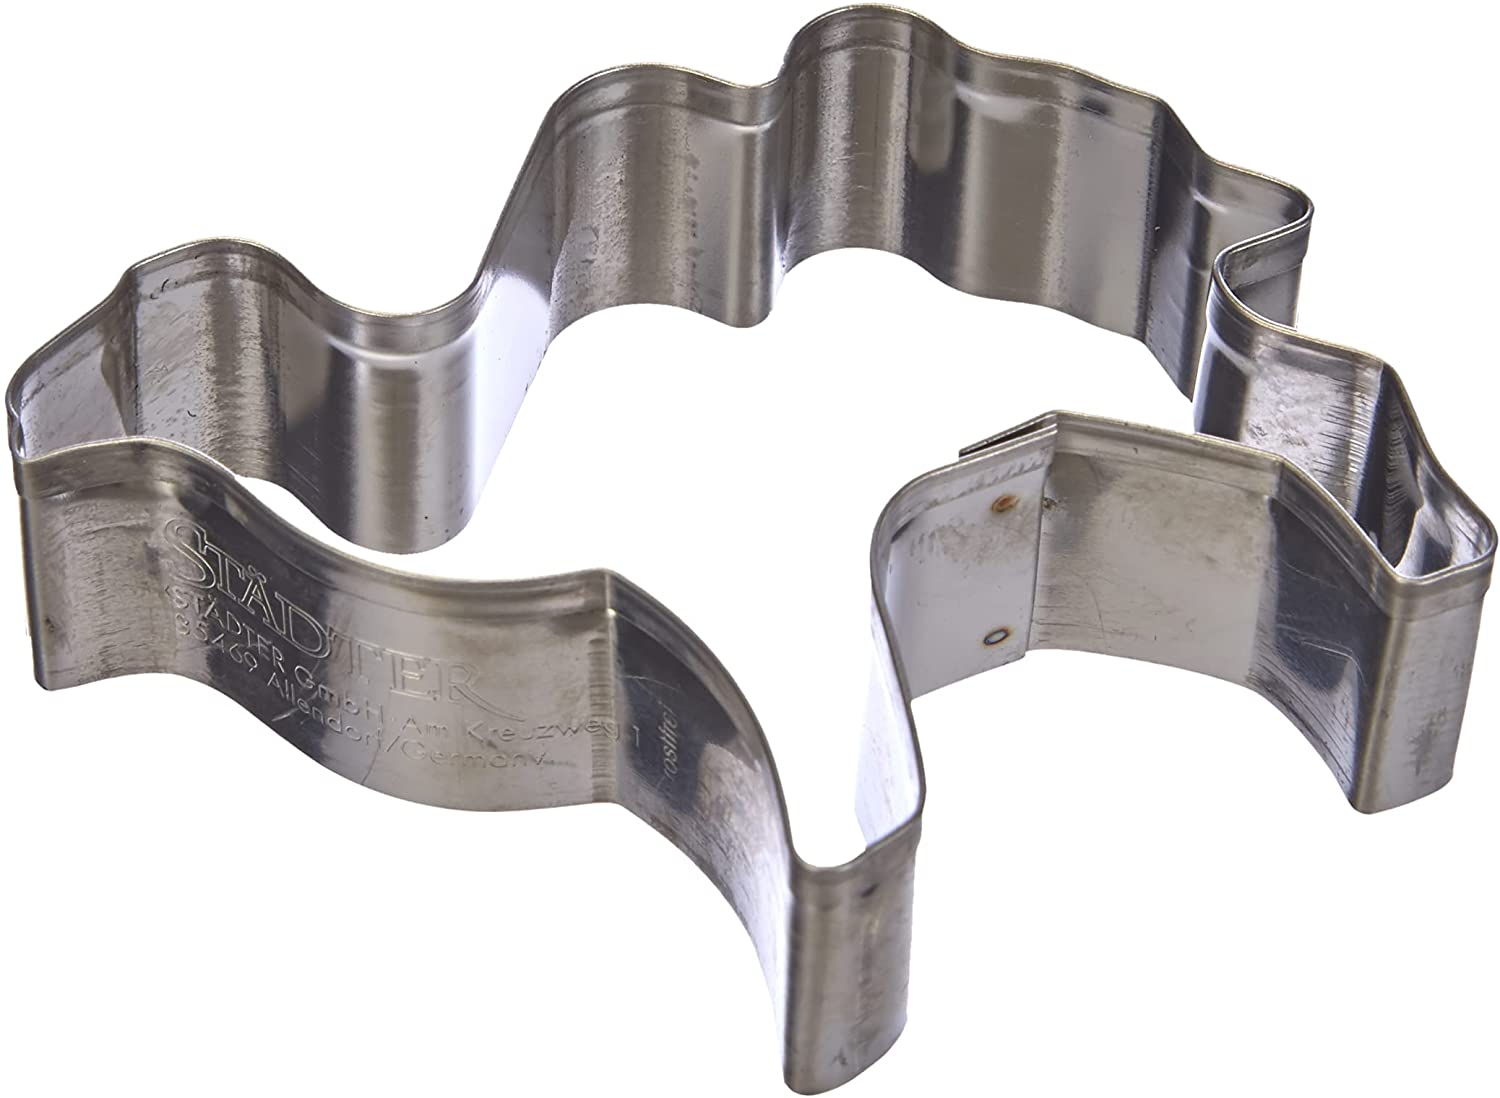 Staedter NEW Camel cookie cutter stainless steel, 8 cm